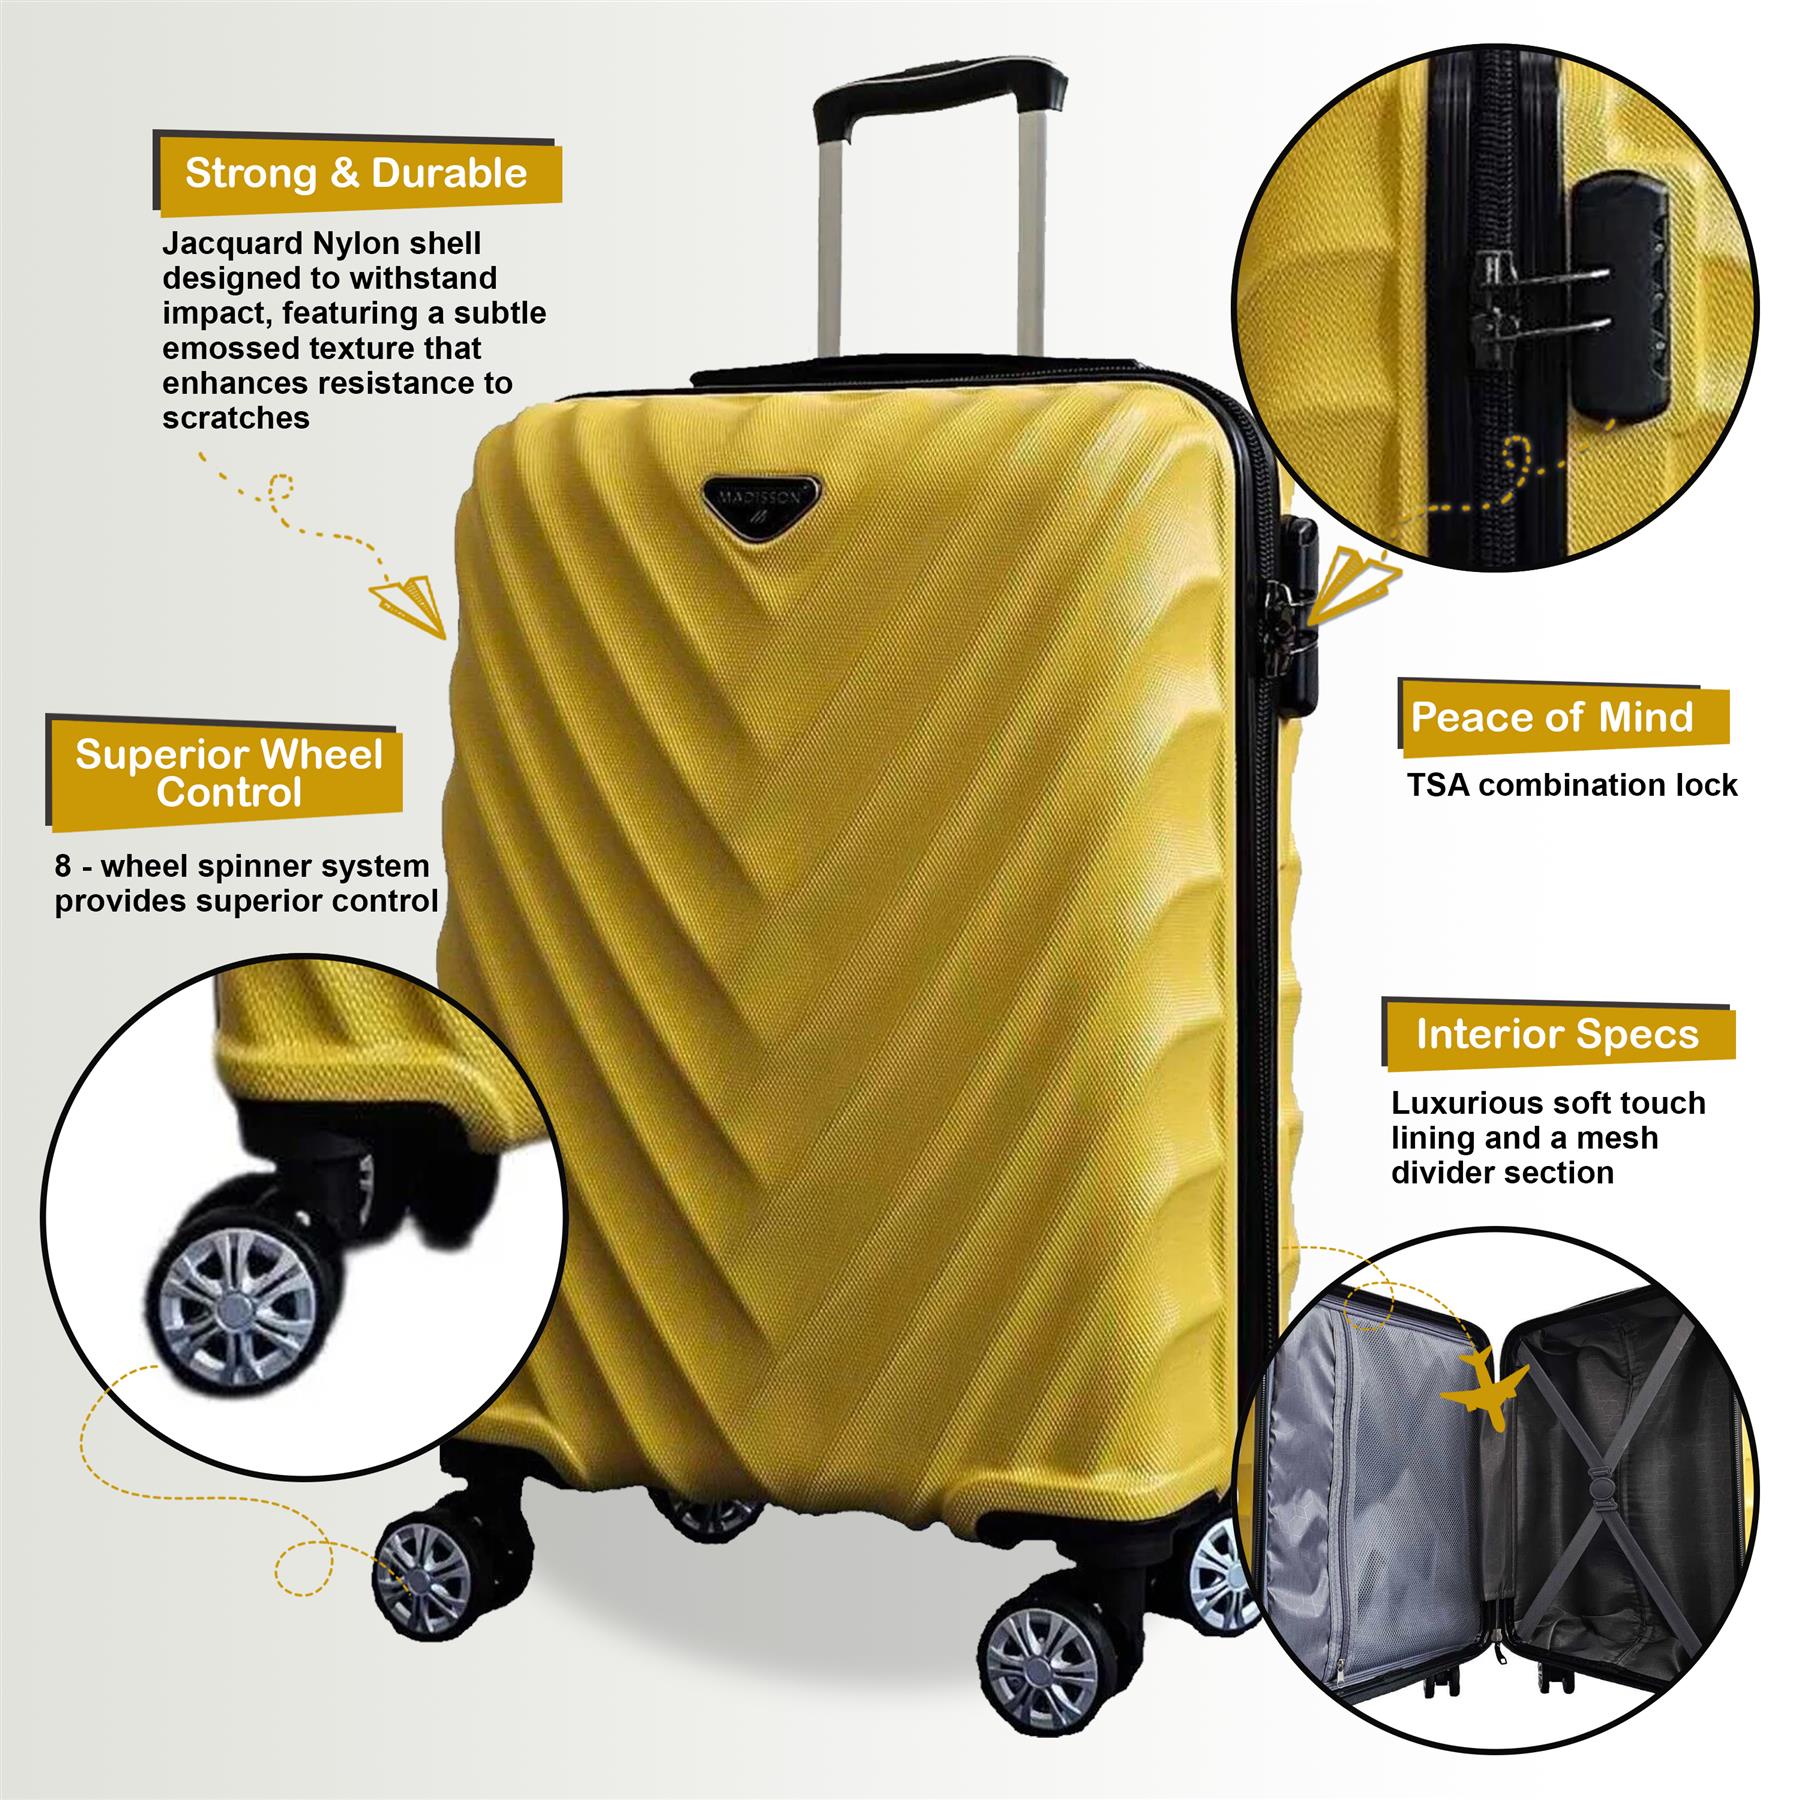 Chatom Large Hard Shell Suitcase in Yellow